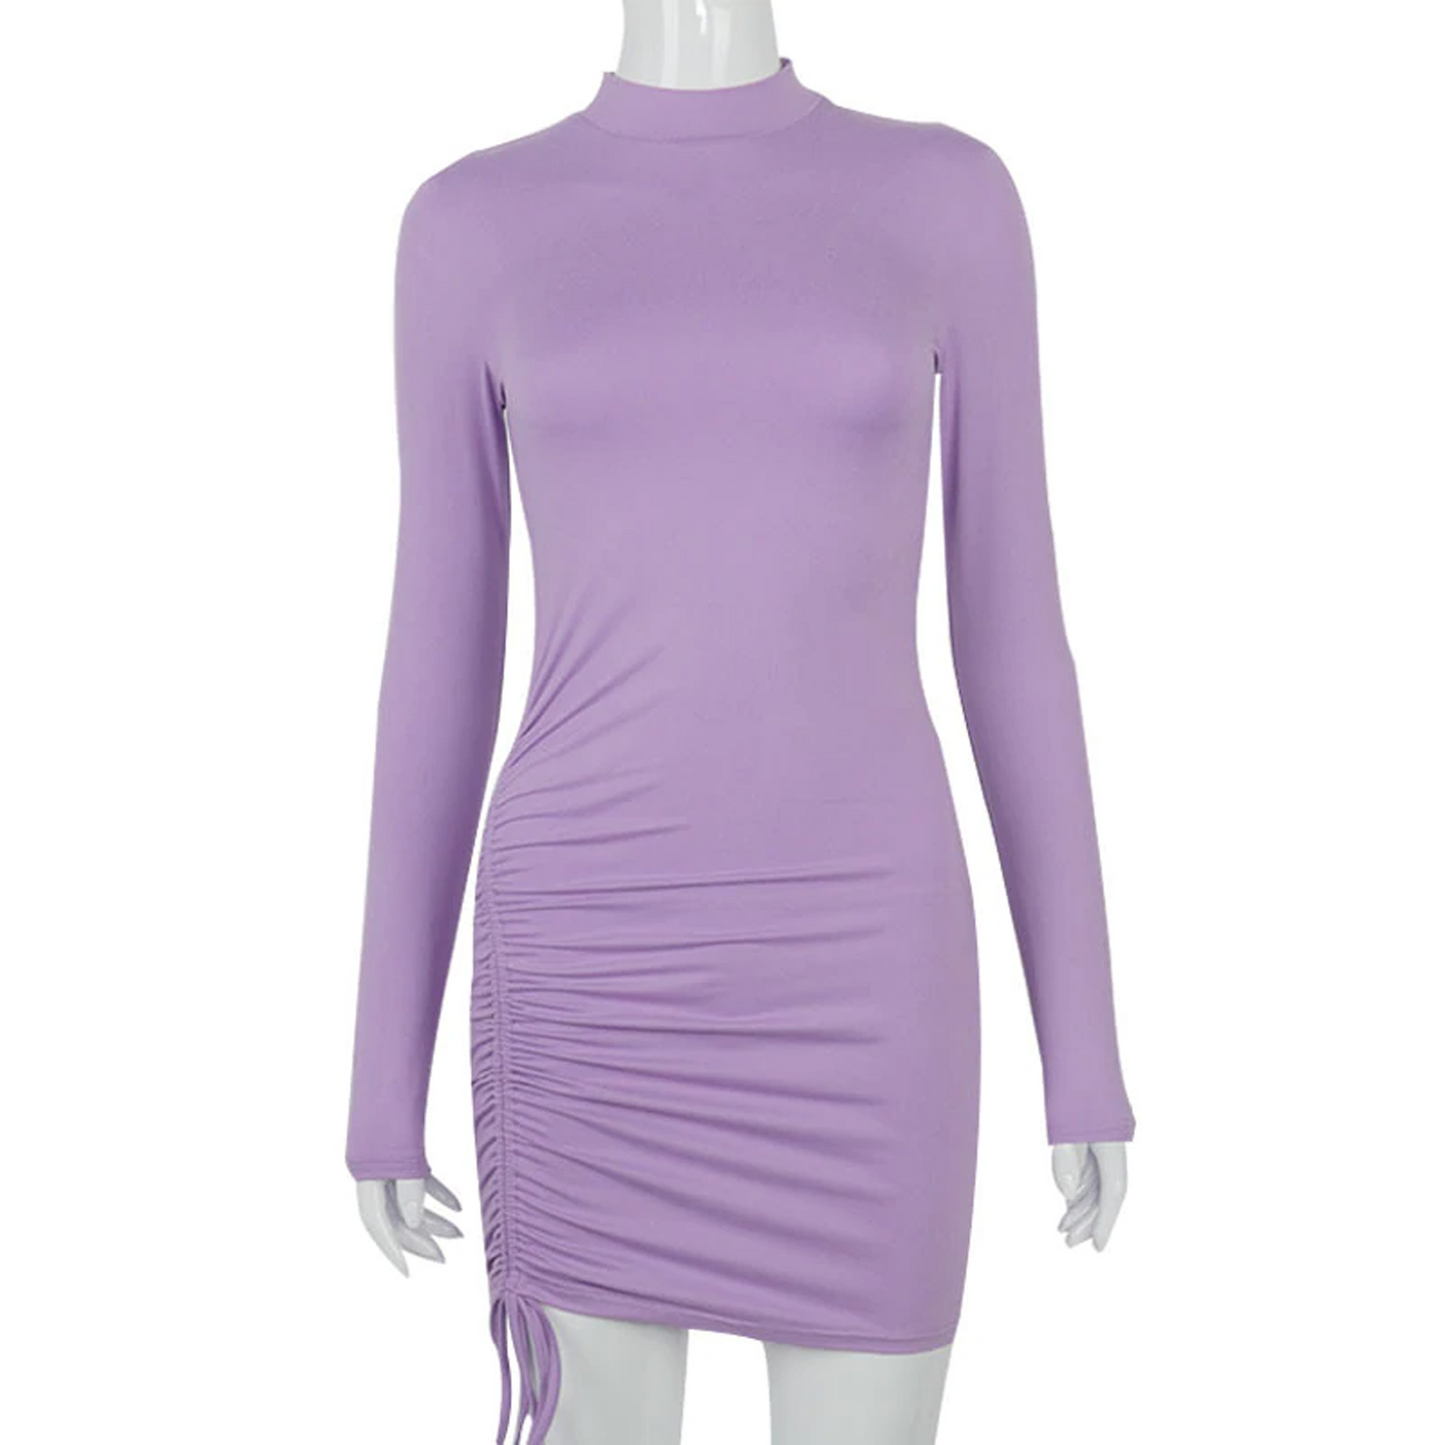 Ruched Bodycon Party Mini Dress